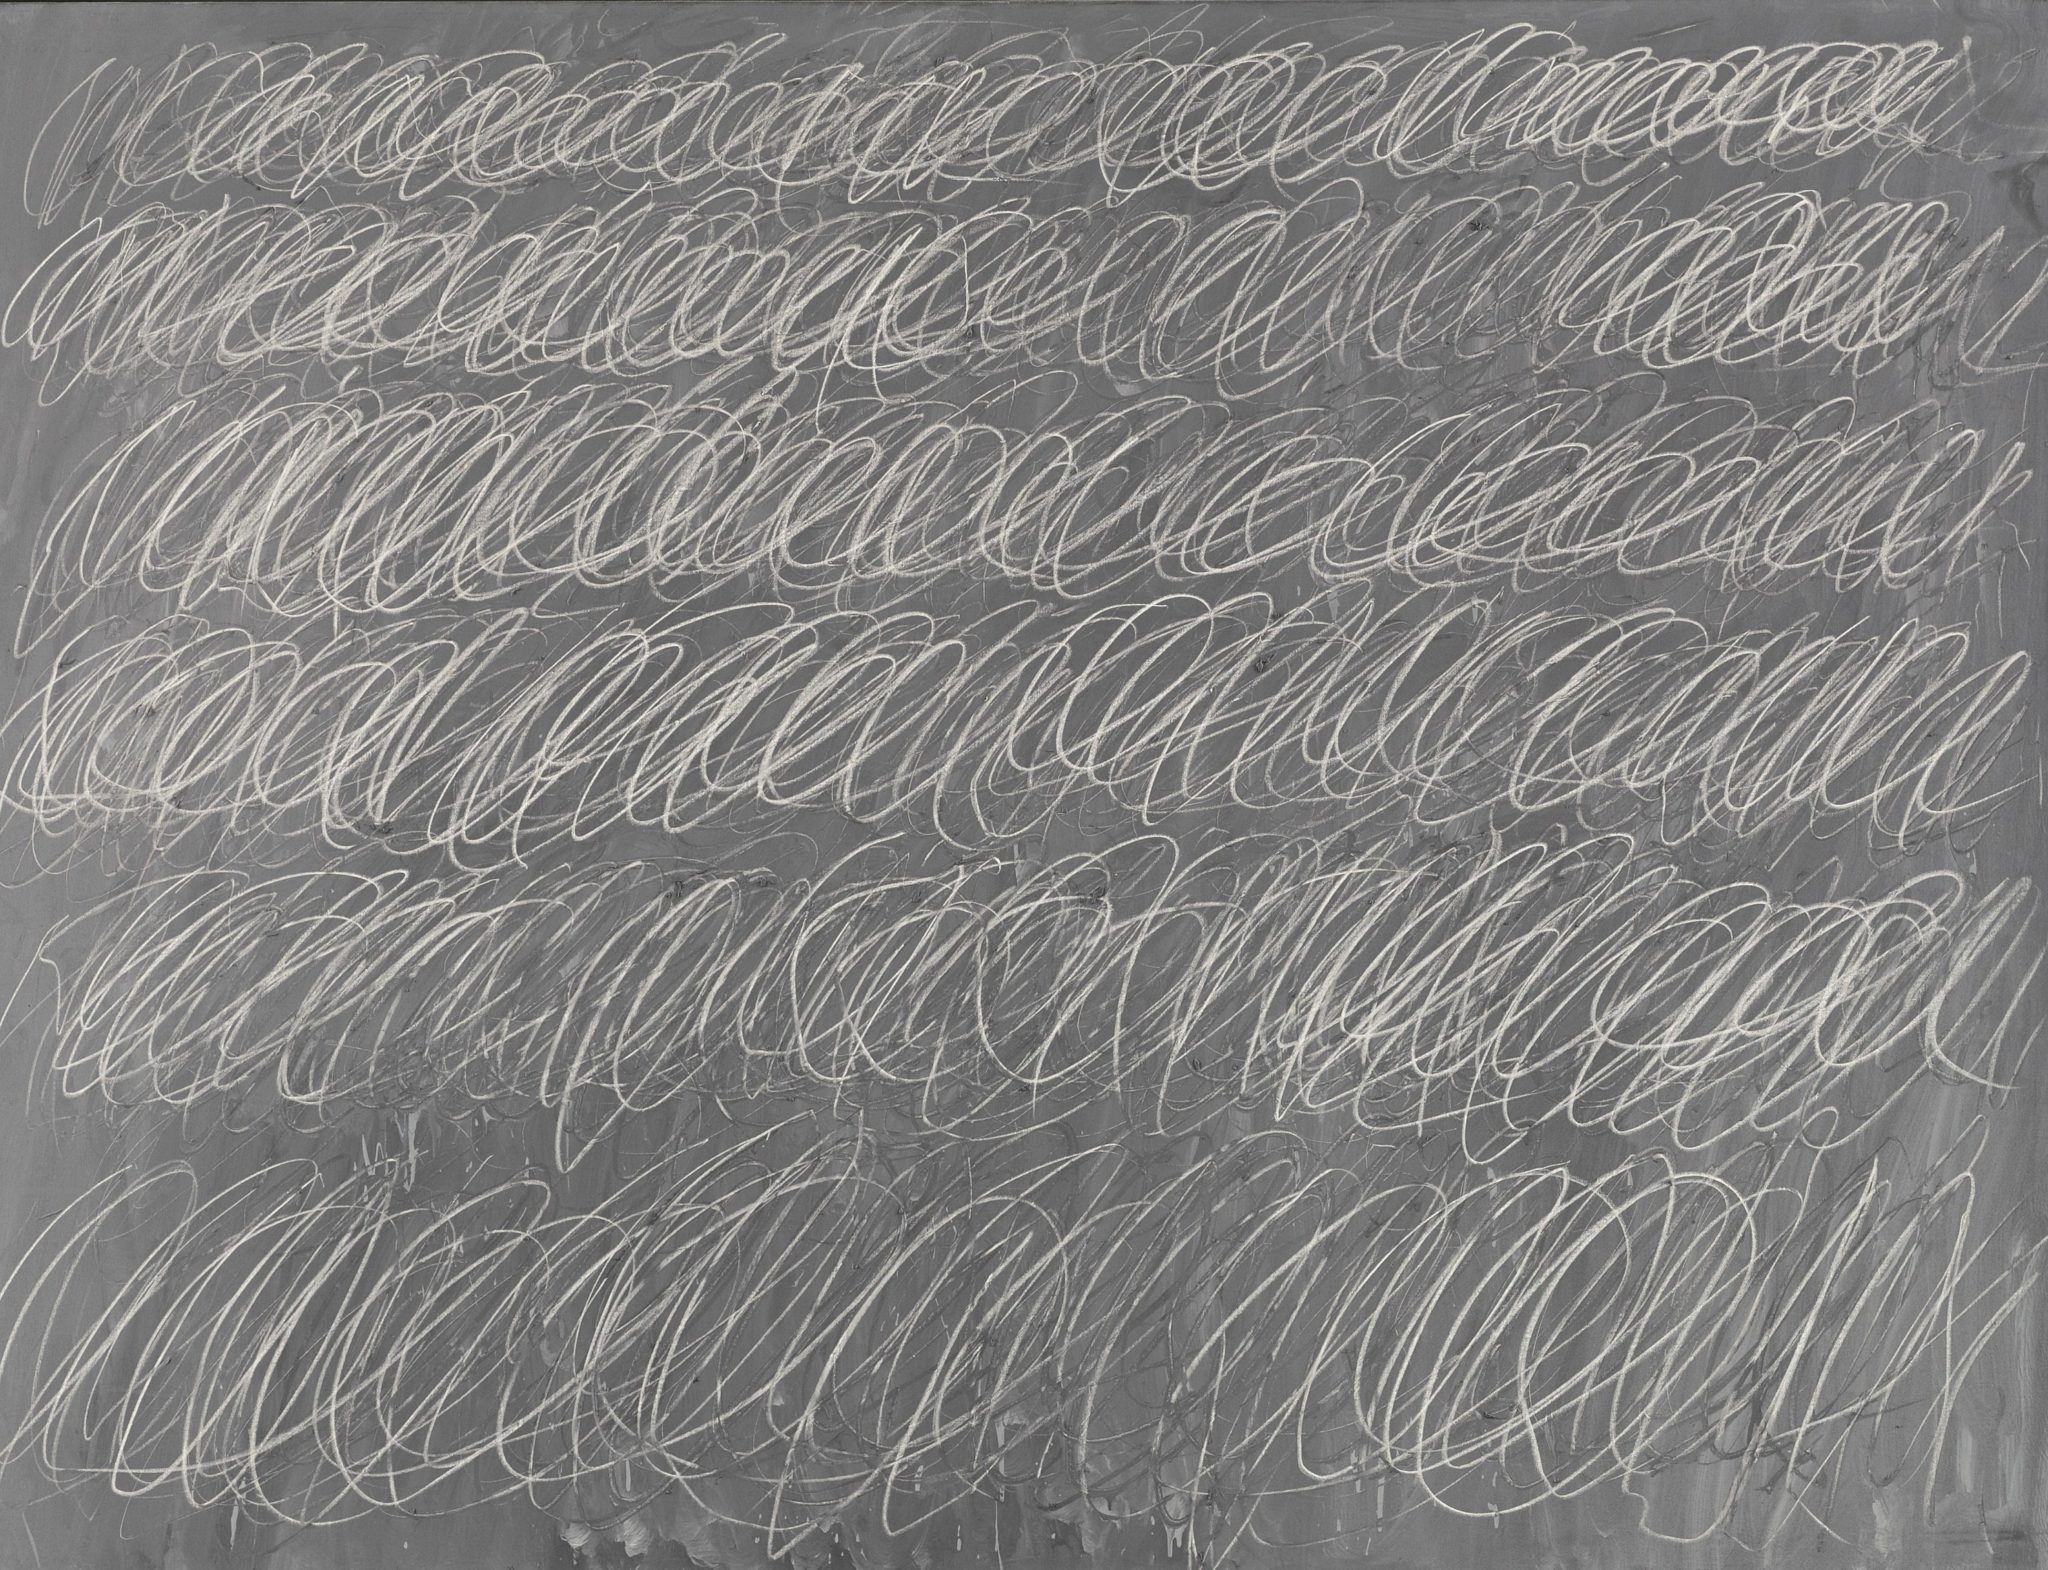 Cy Twombly, Untitled, 1968 [New York City]